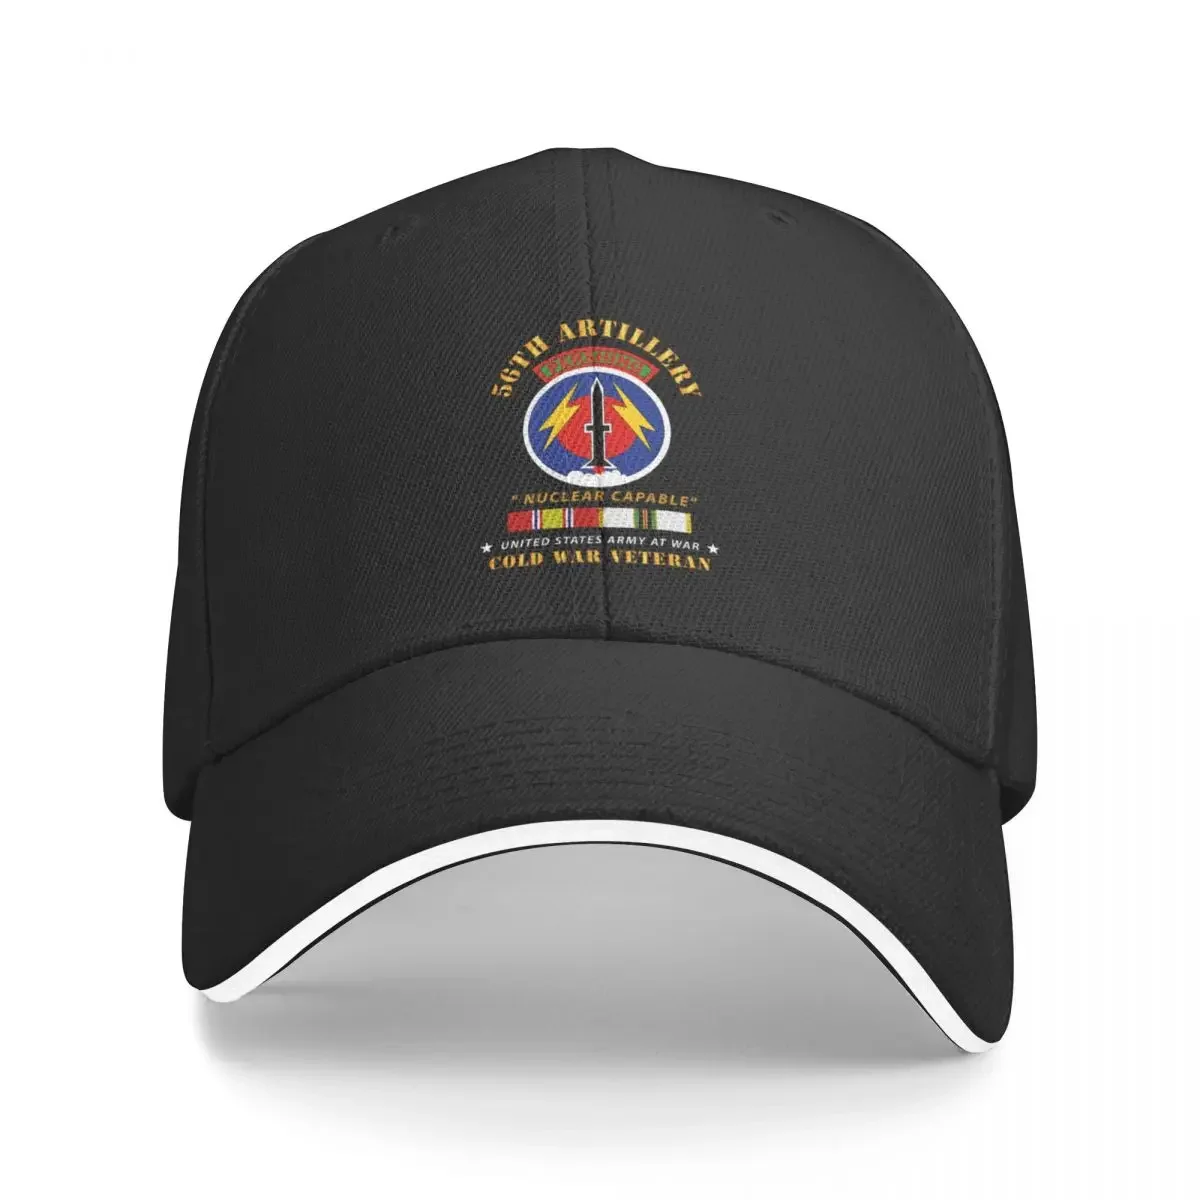 

Army - 56th Artillery - Pershing - Nuclear Capable w COLD Svc Medals Baseball Cap Anime Hat Hood Golf Hat Men Hats Women's